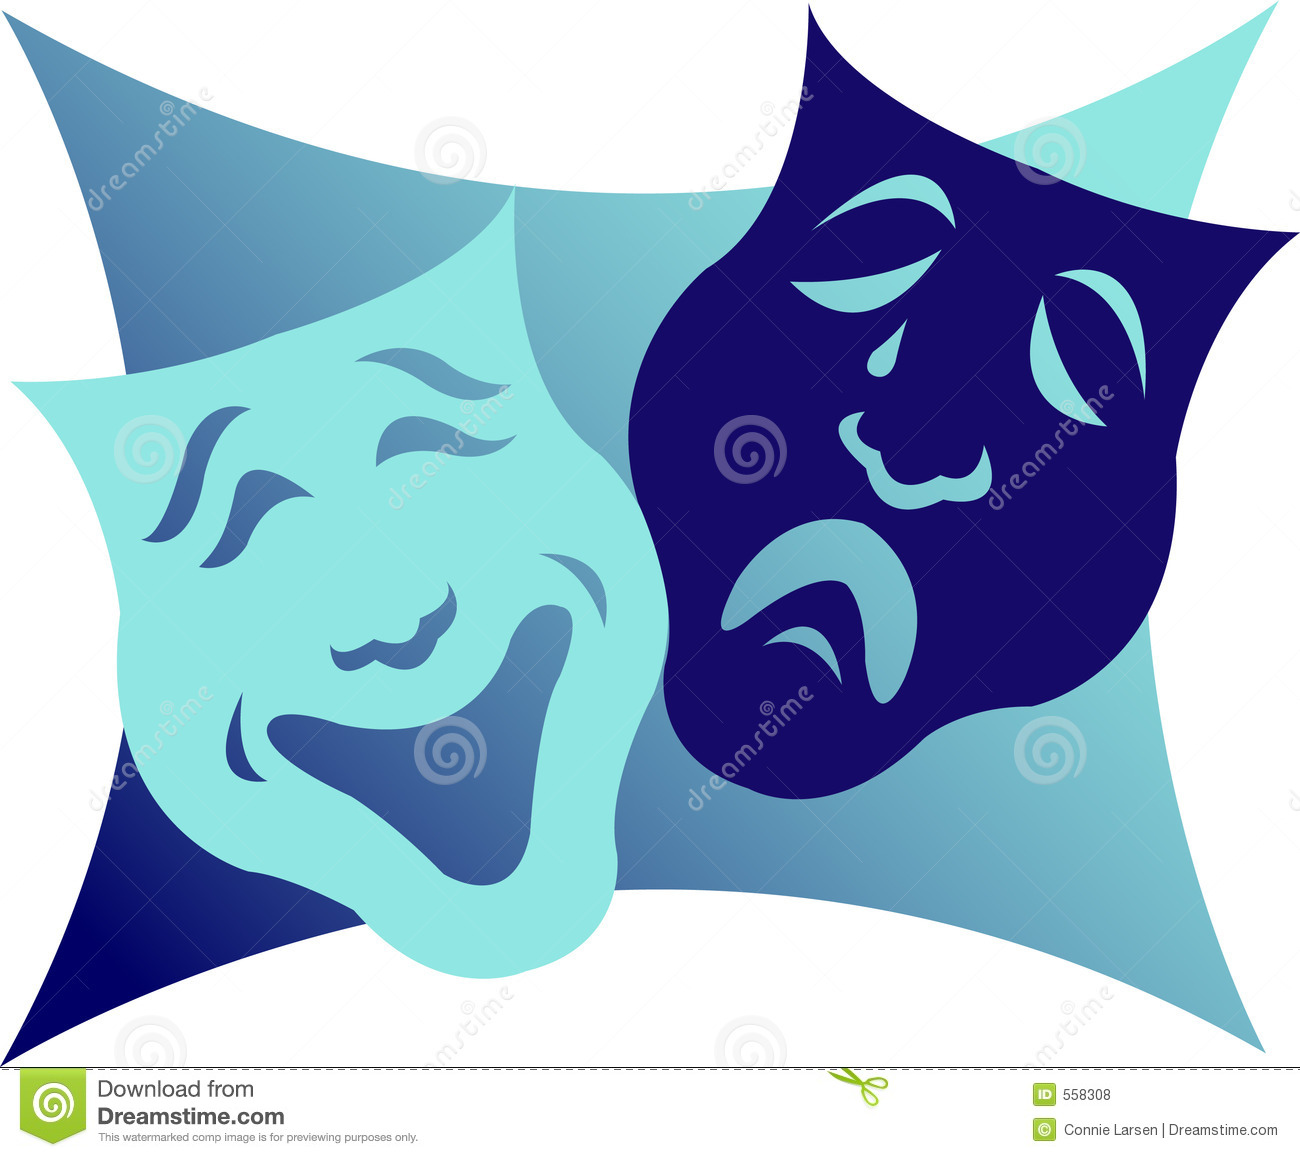 Illustration Of Comedy And Tragedy Masks Which Are A Symbol For The